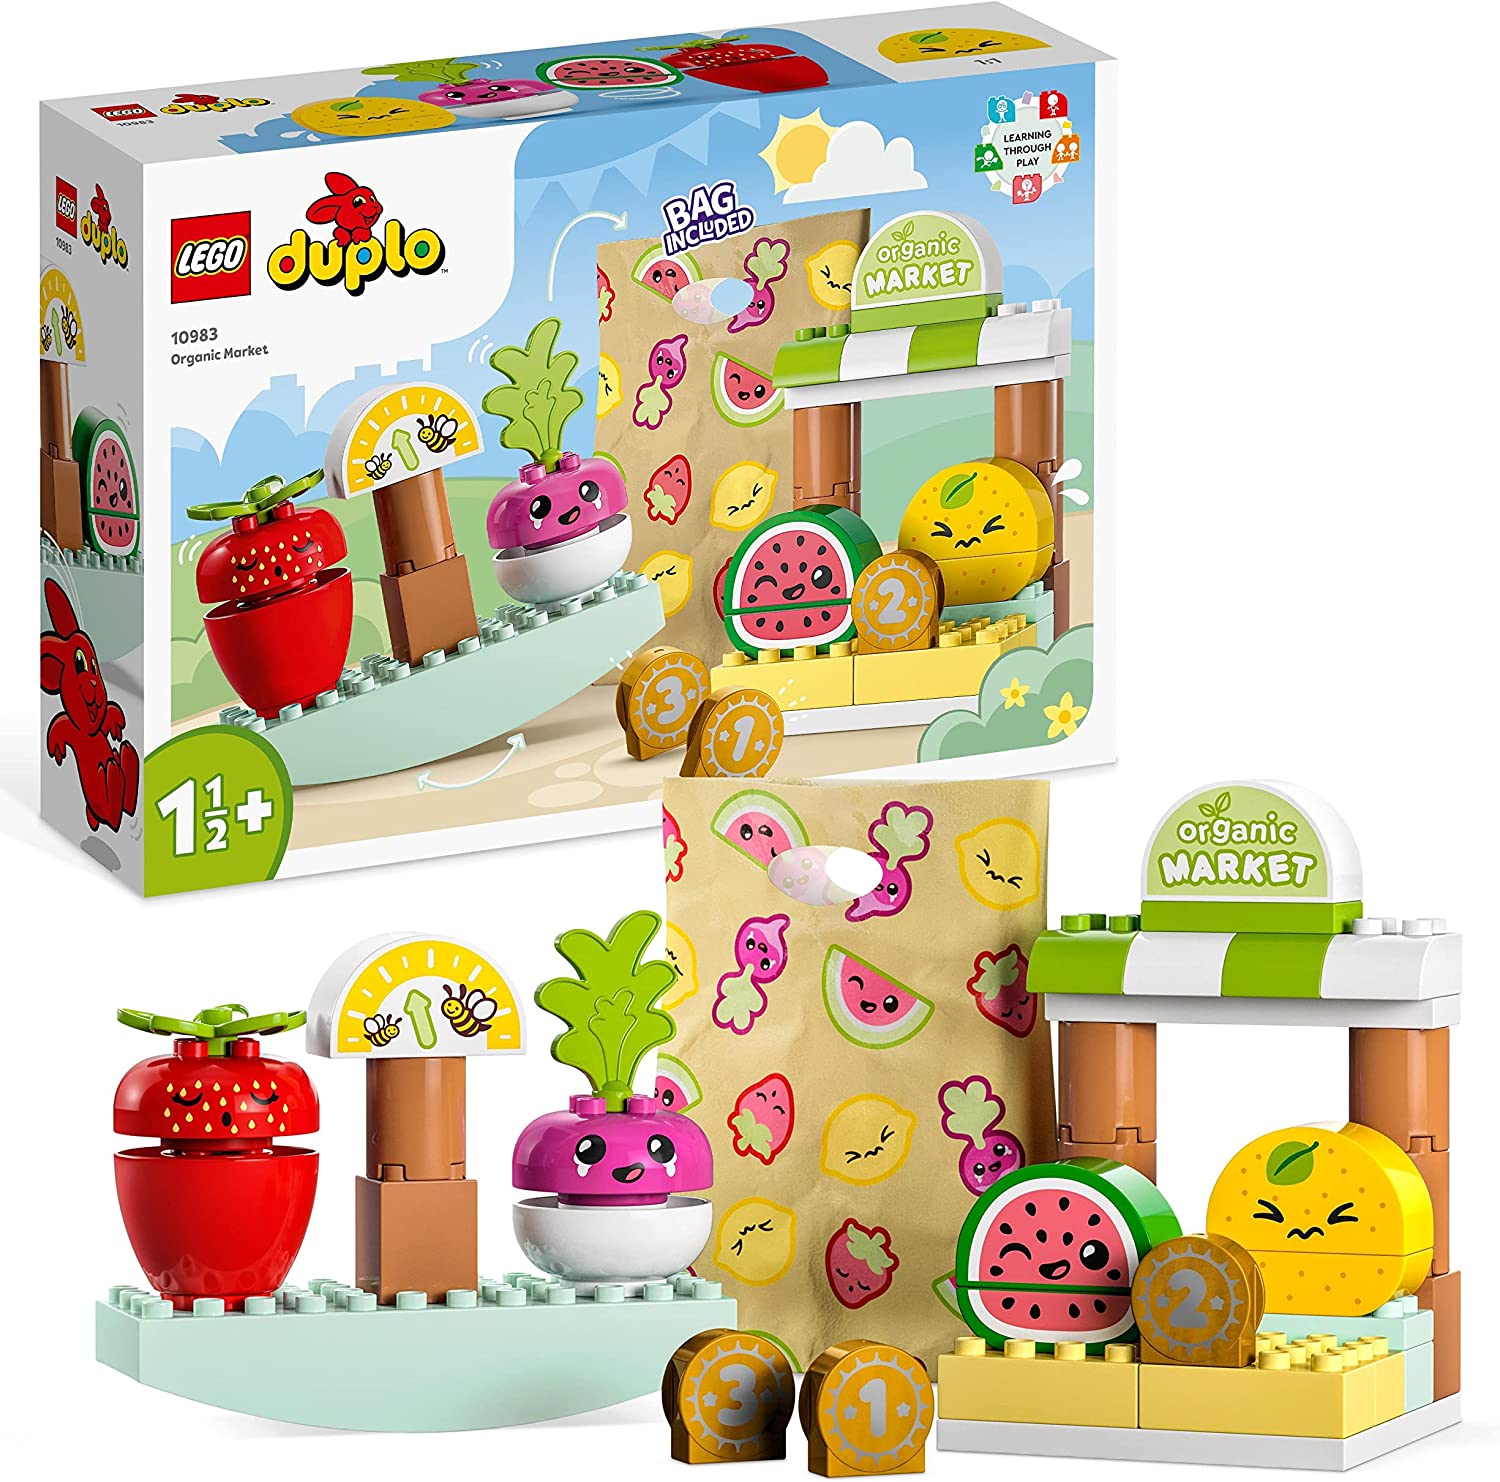 LEGO 10983 Duplo My First Biomarkt, Toy Shop Set for Boys and Girls, Educational Toy for Toddlers from 1.5 Years, Fruit and vegetable accessories